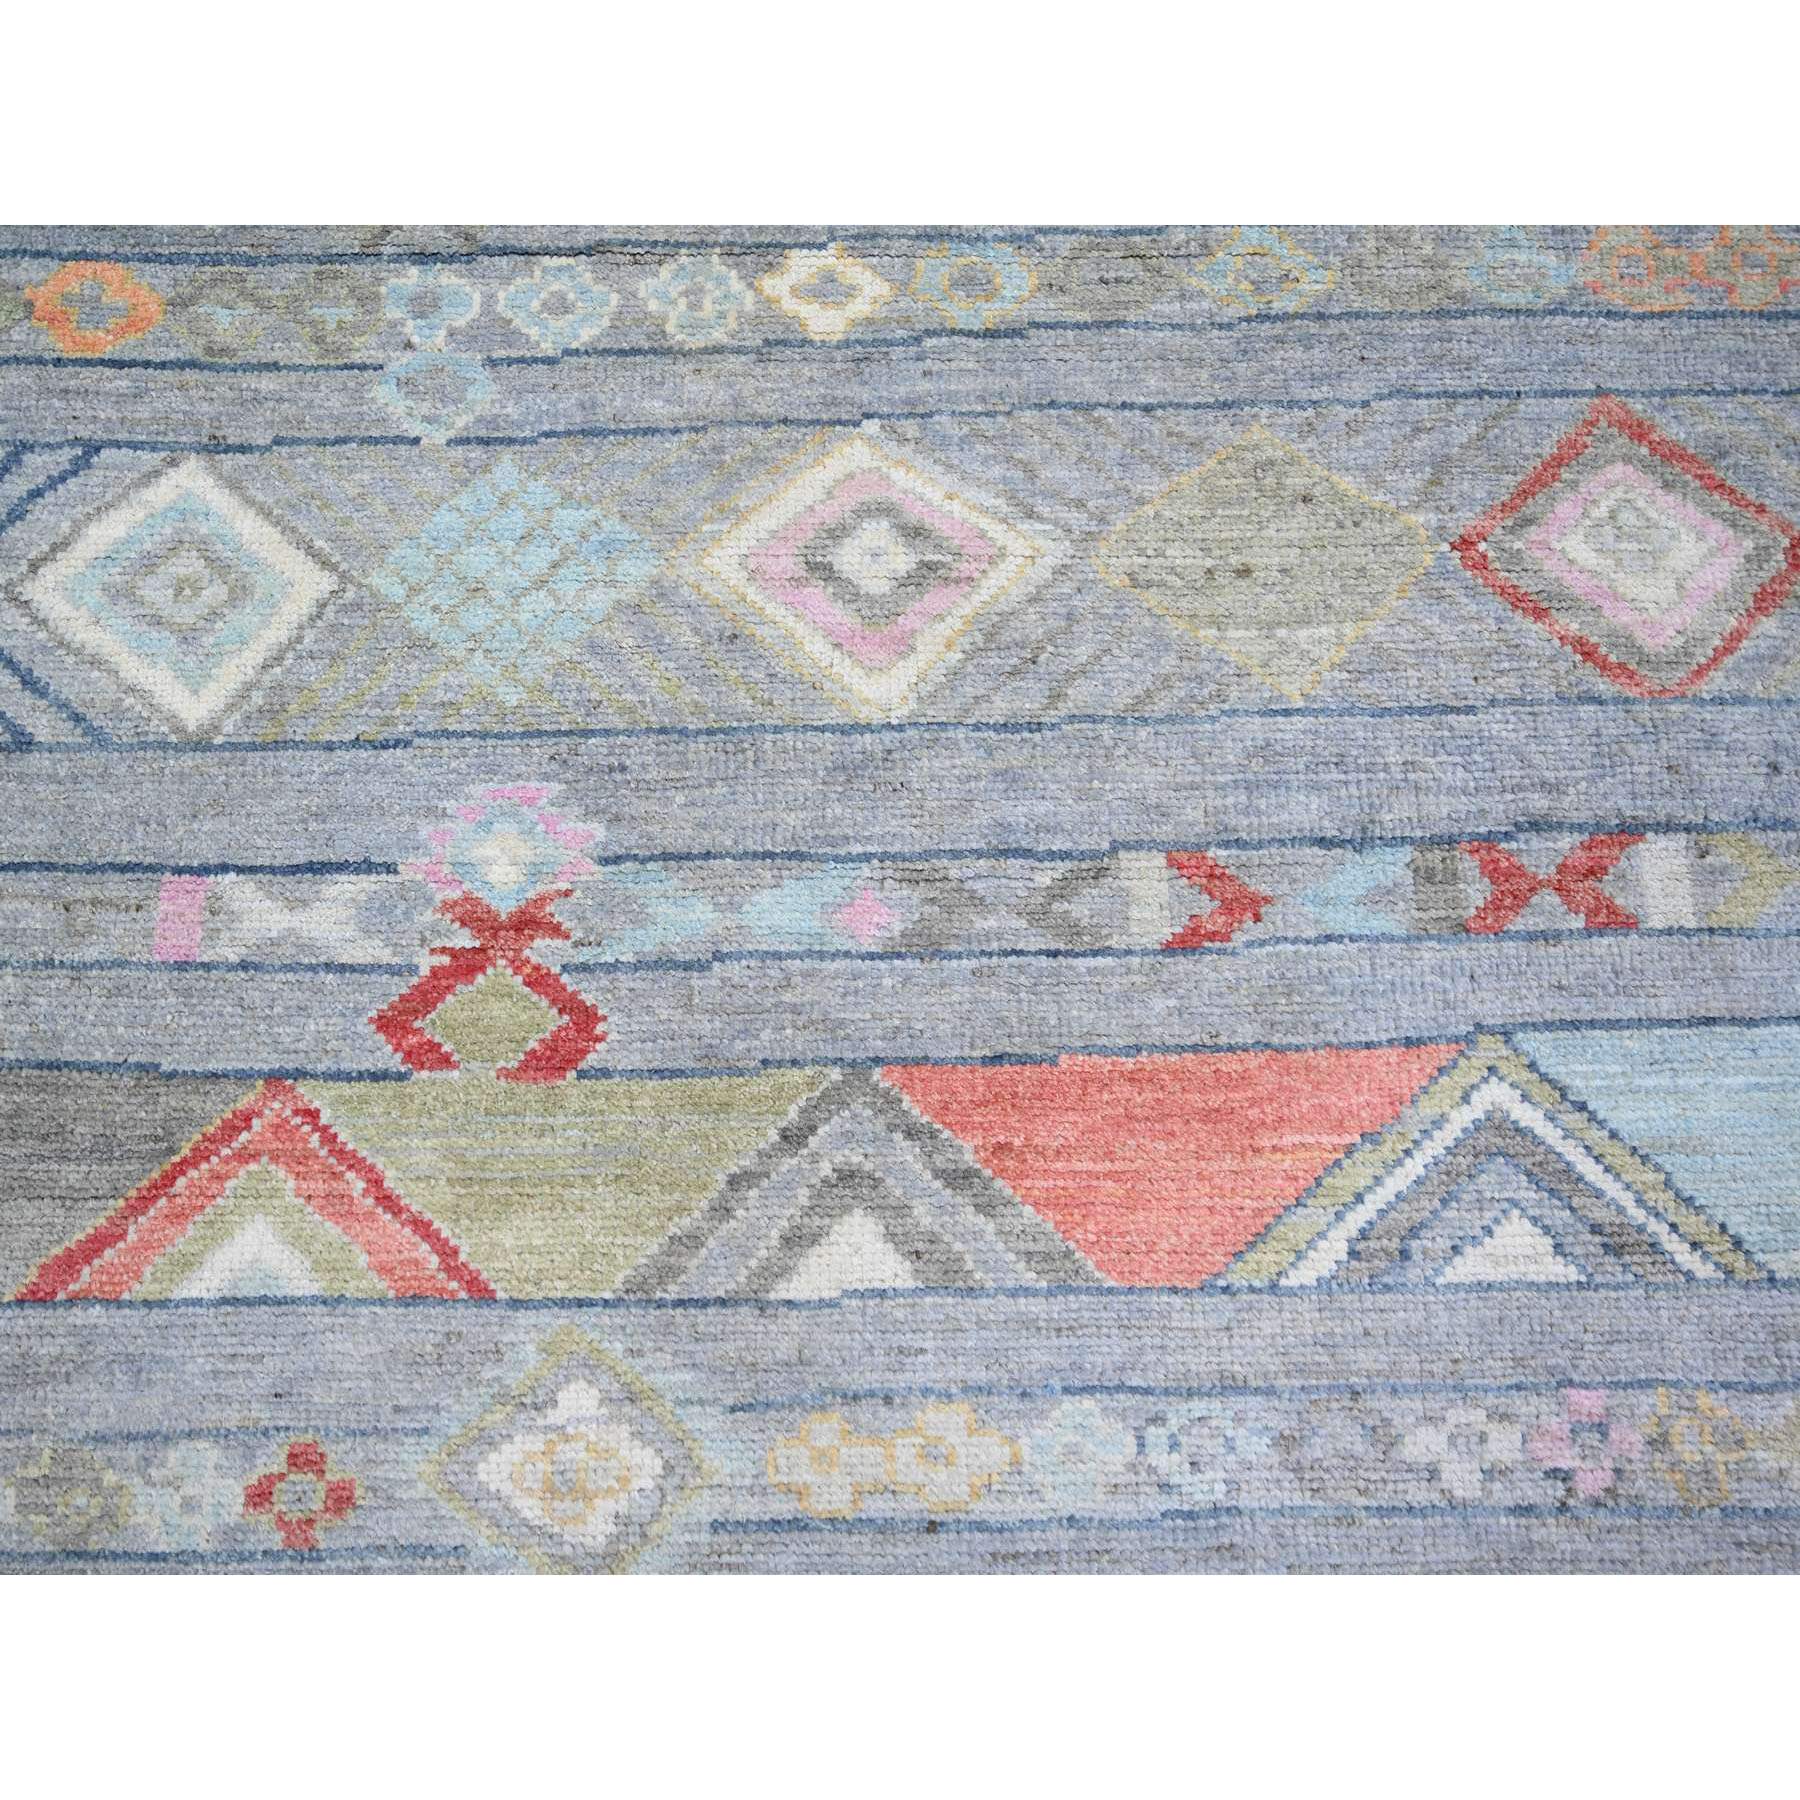 8'2"x9'8" Cadet Gray, Vegetable Dyes Soft Wool, Hand Woven Beni Ourain Moroccan Berber Design, Oriental Rug 